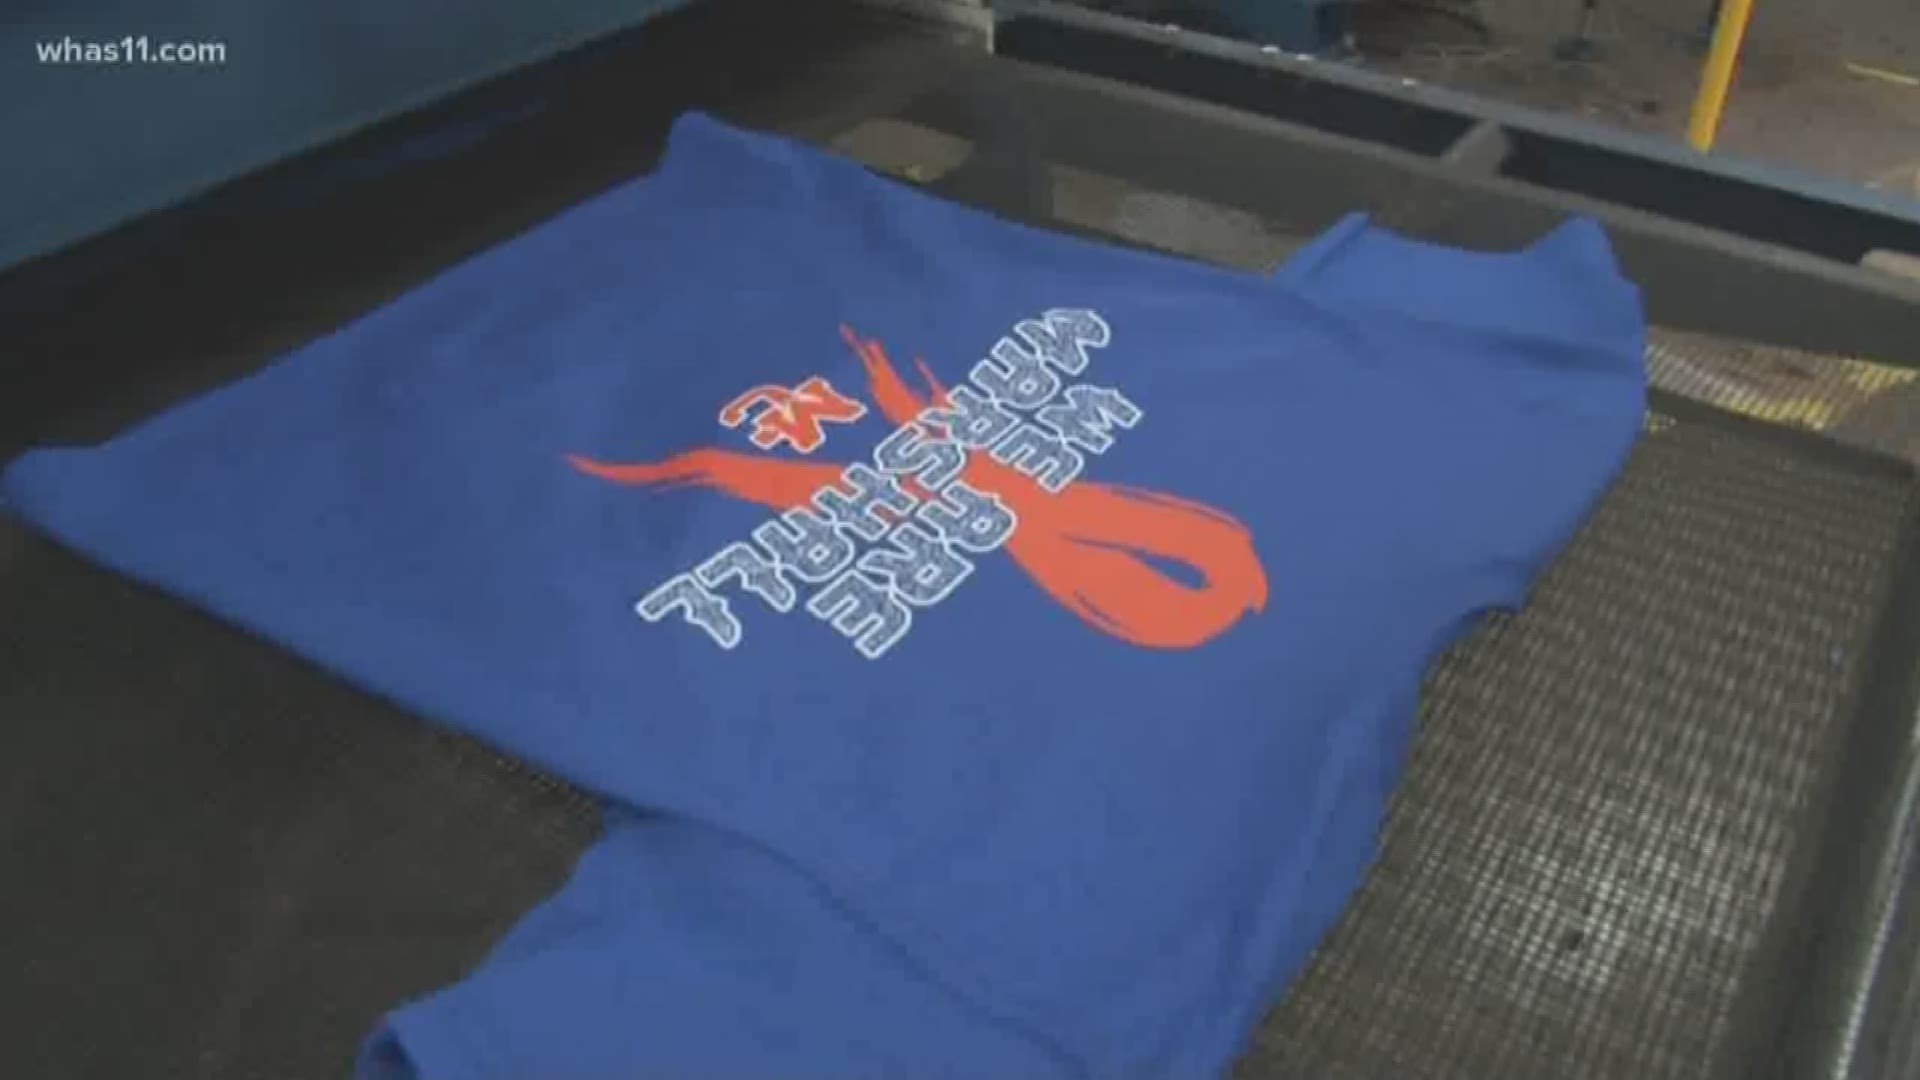 Katlyn Gardenhire is live at Marshall County High School bringing the story of how a local company is selling shirts to donate to victims' families.